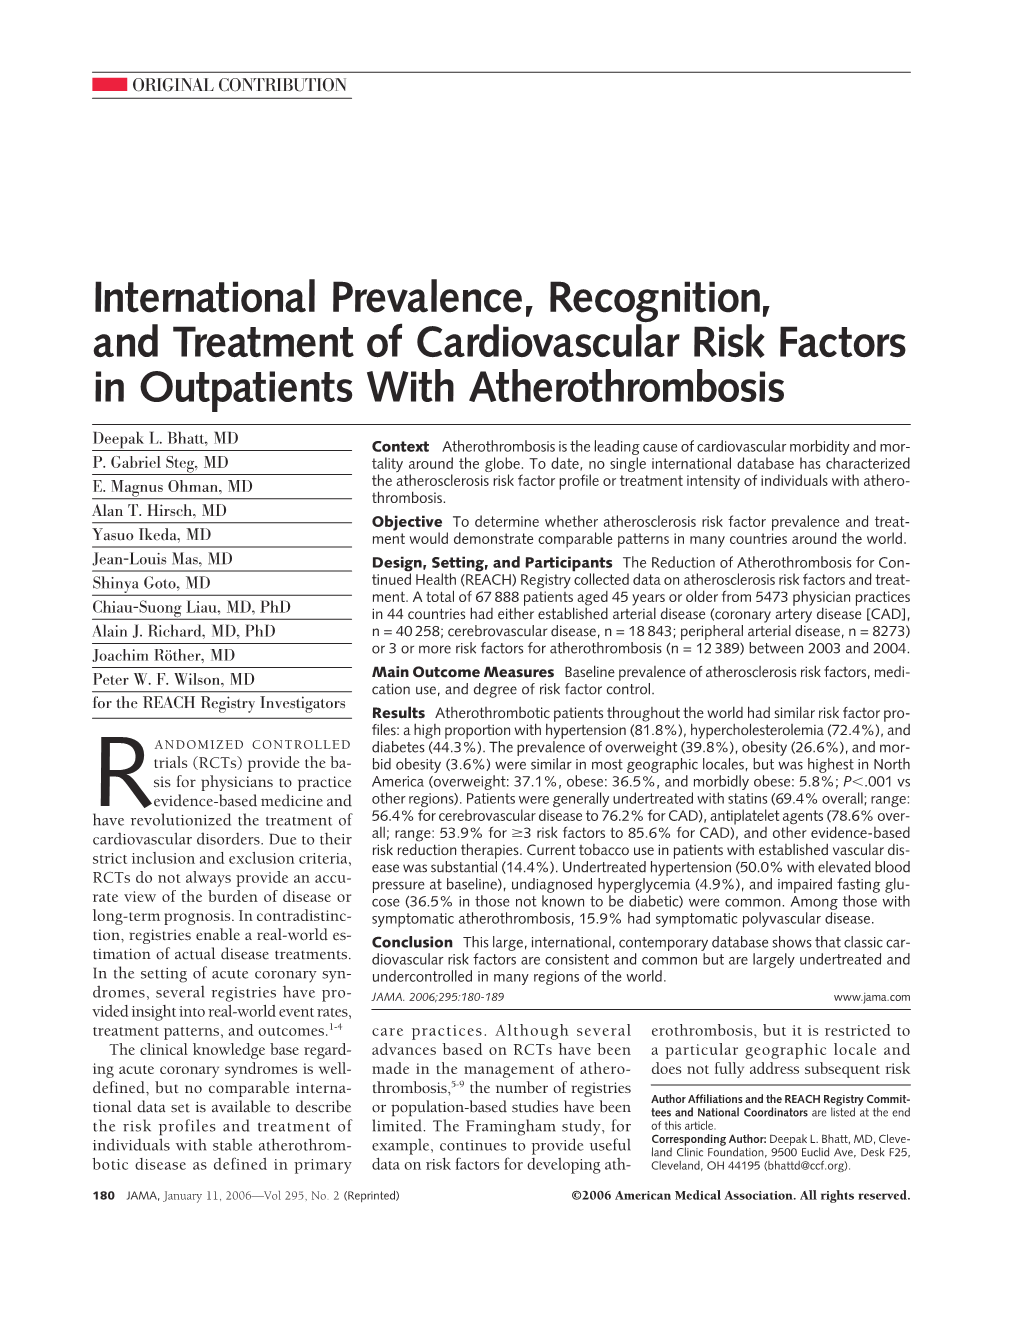 International Prevalence, Recognition, and Treatment of Cardiovascular Risk Factors in Outpatients with Atherothrombosis